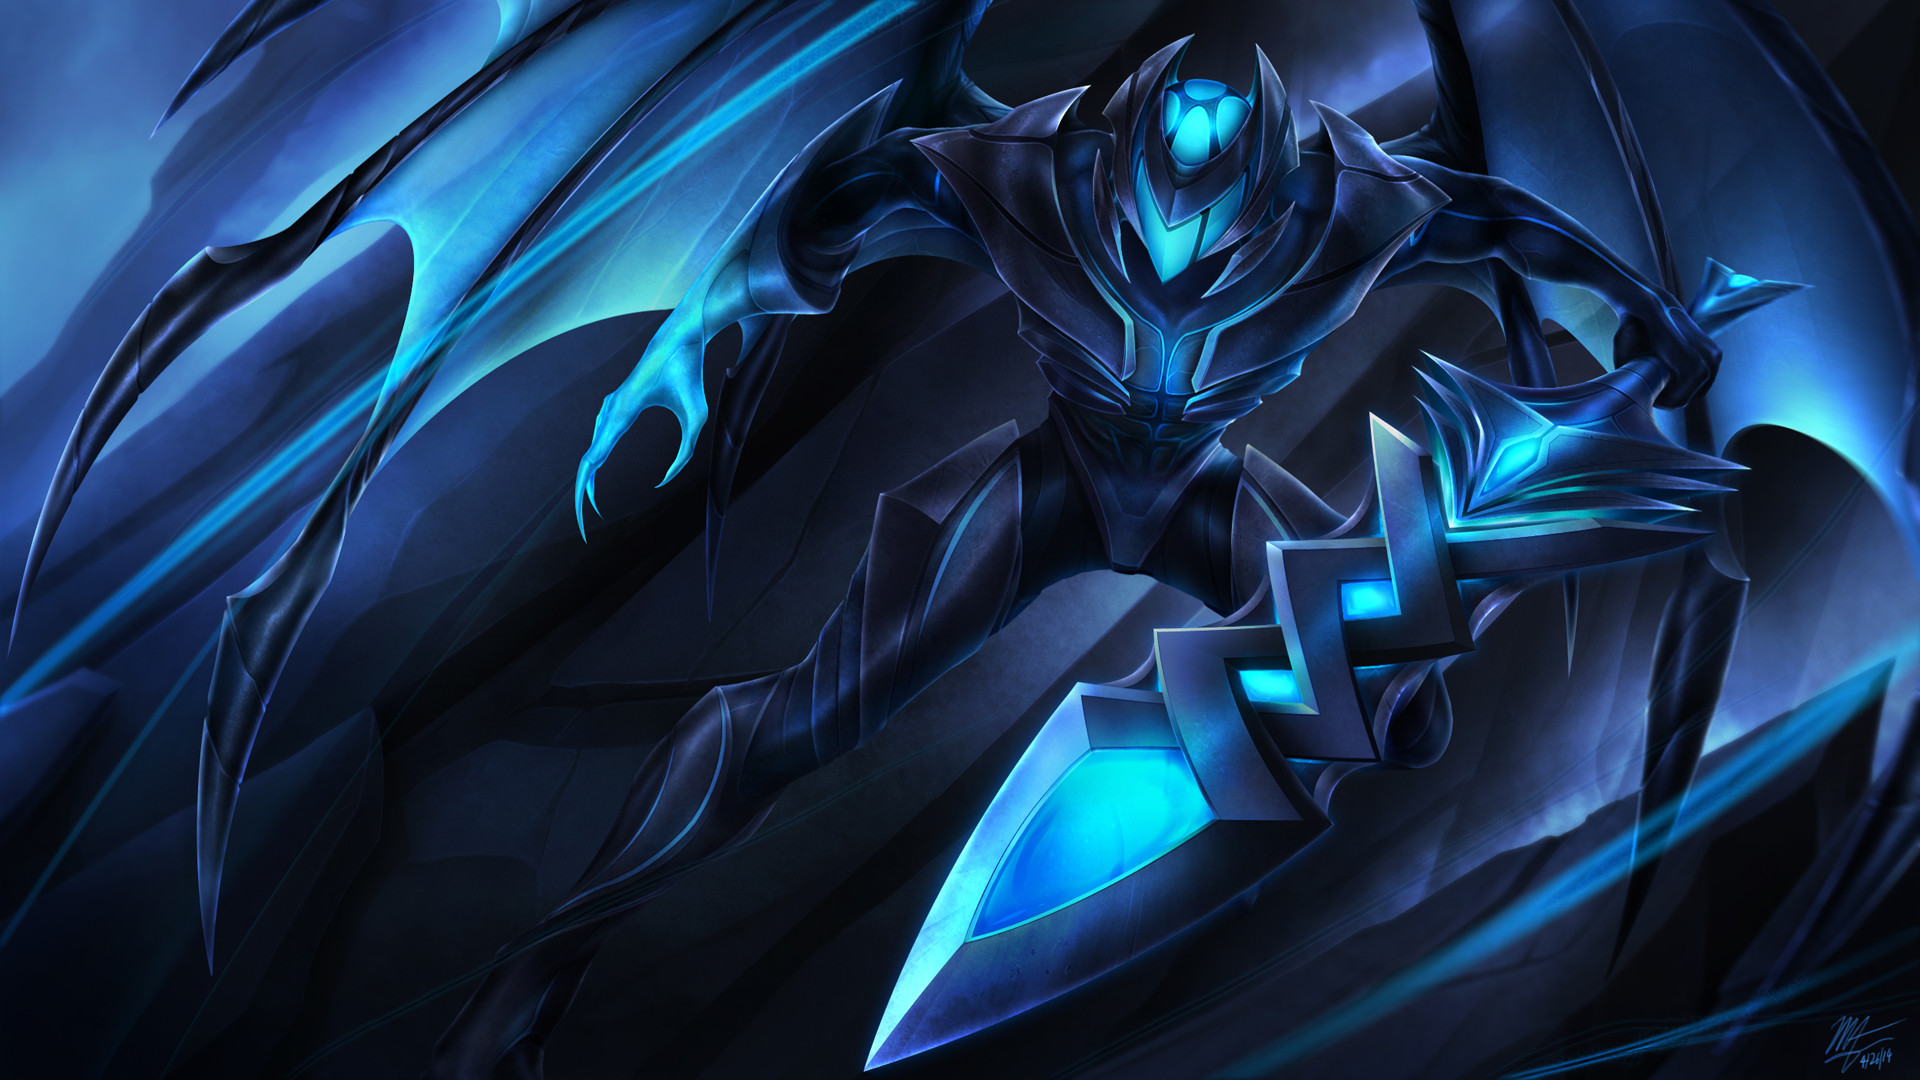 1920x1080 Soul Reaver Darius League of legends skin by Jadysseus on DeviantArt Why  isn't the Soul Reaver skin line continued?